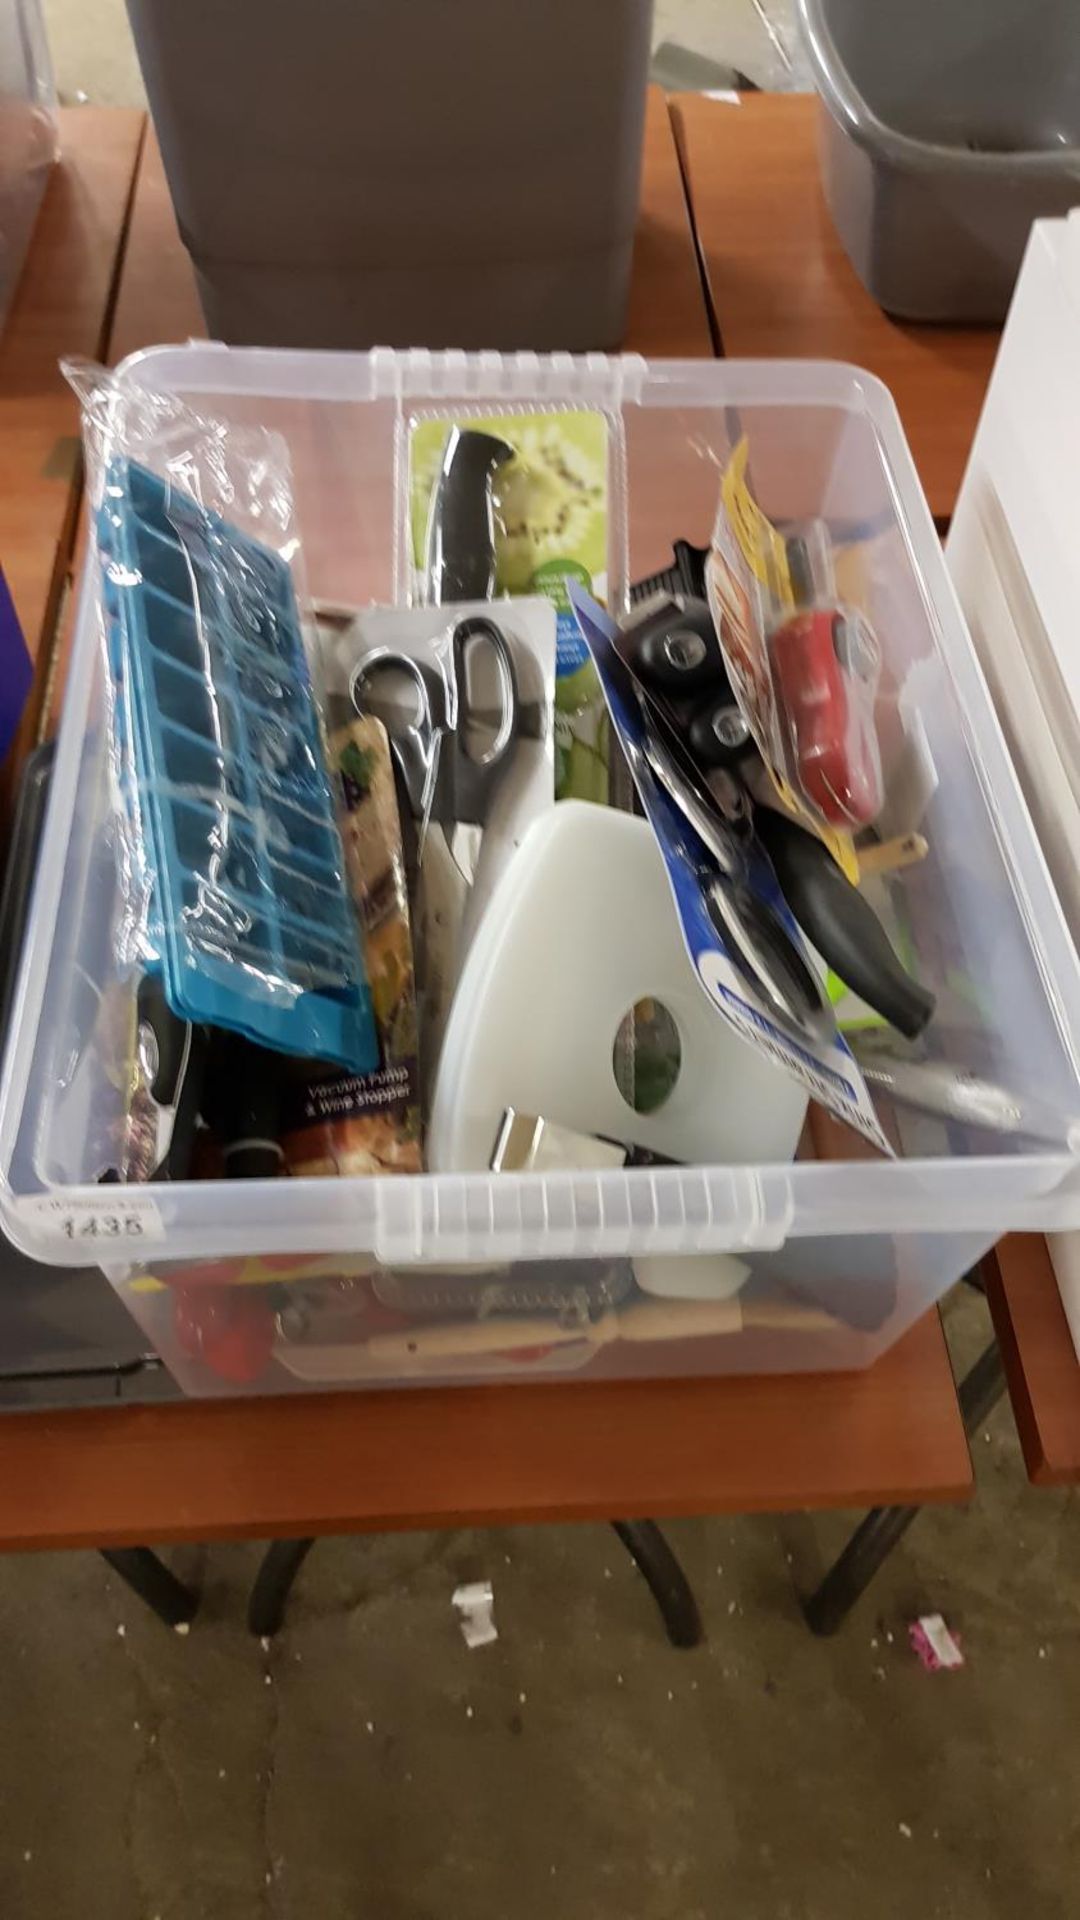 Contents of Box – Mixed Kitchen Goods